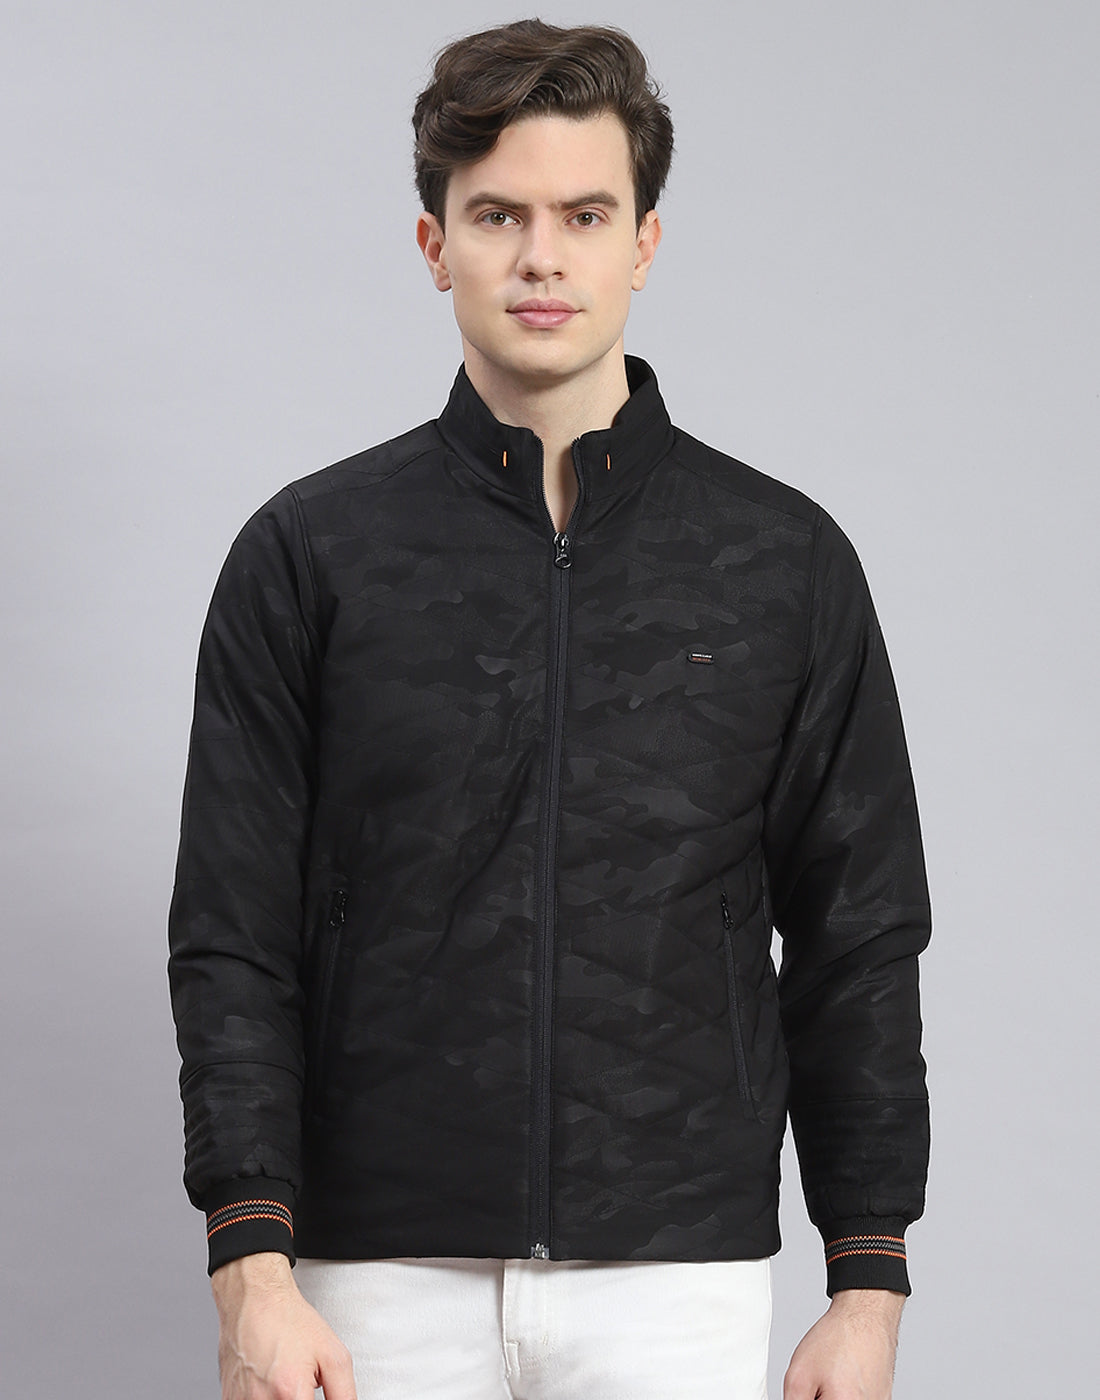 hooded chase jacket men black in cotton - CARHARTT WIP - d — 2